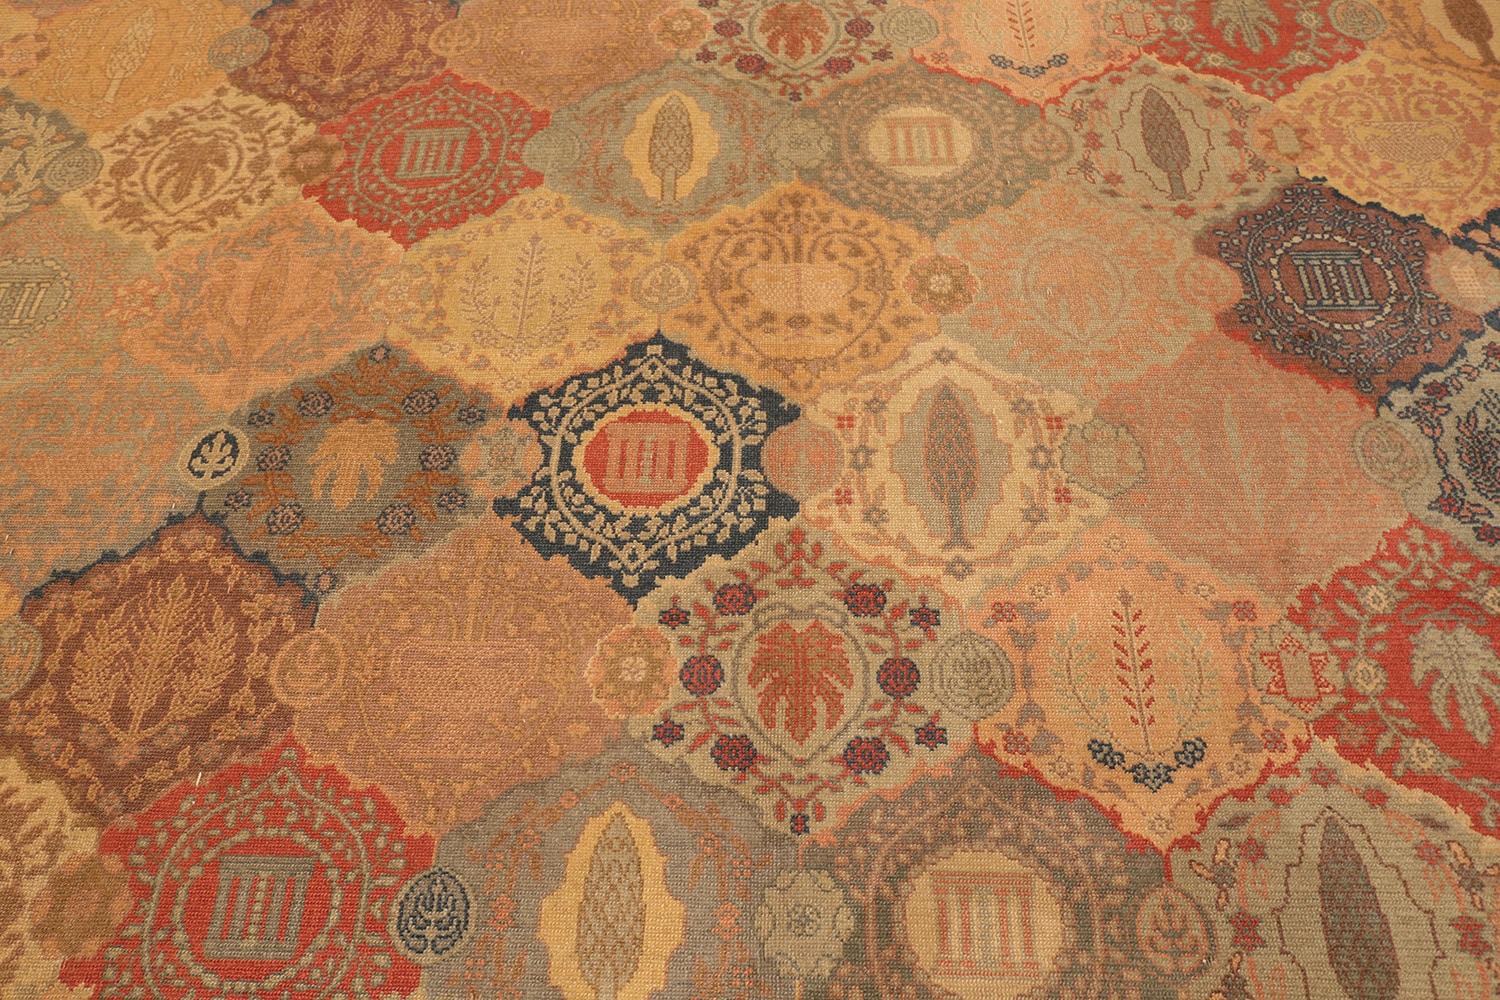 20th Century Nazmiyal Collection Antique Israeli Bezalel Carpet. 15 ft 9 in x 17 ft 10 in